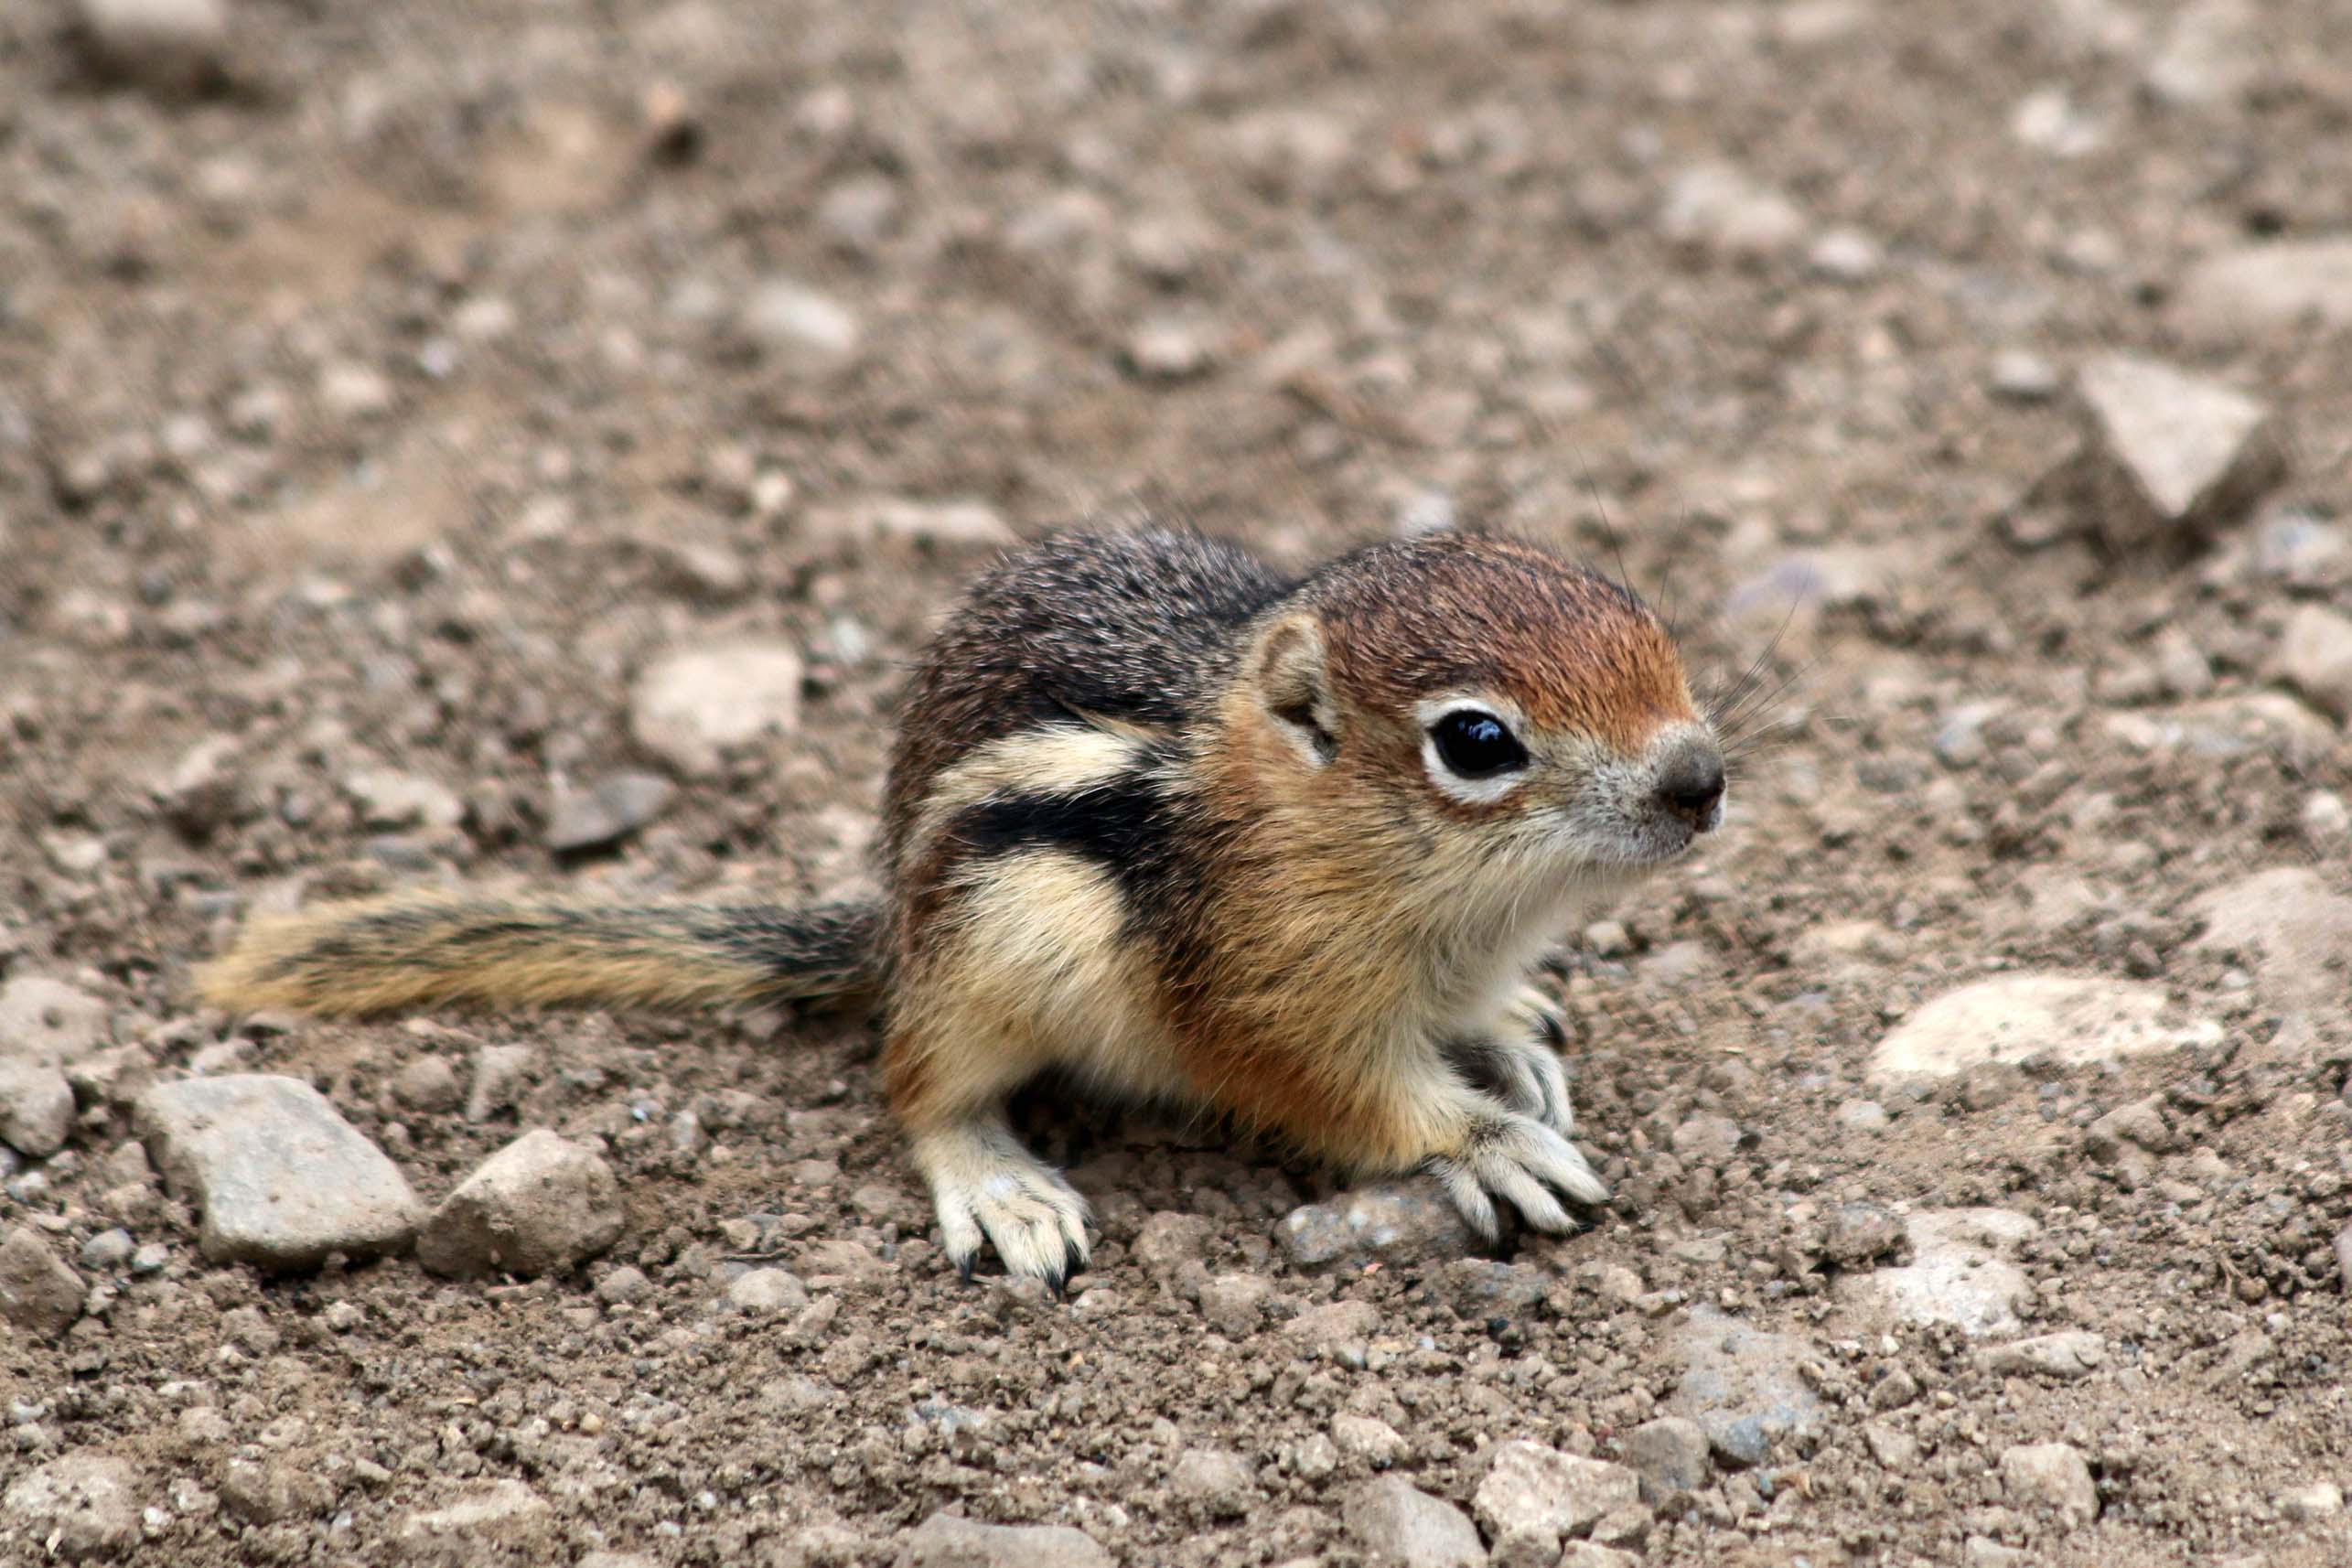 Baby ground squirrel at Rocky Mountain Biological Laboratory. [Photo] Jimmy Lee